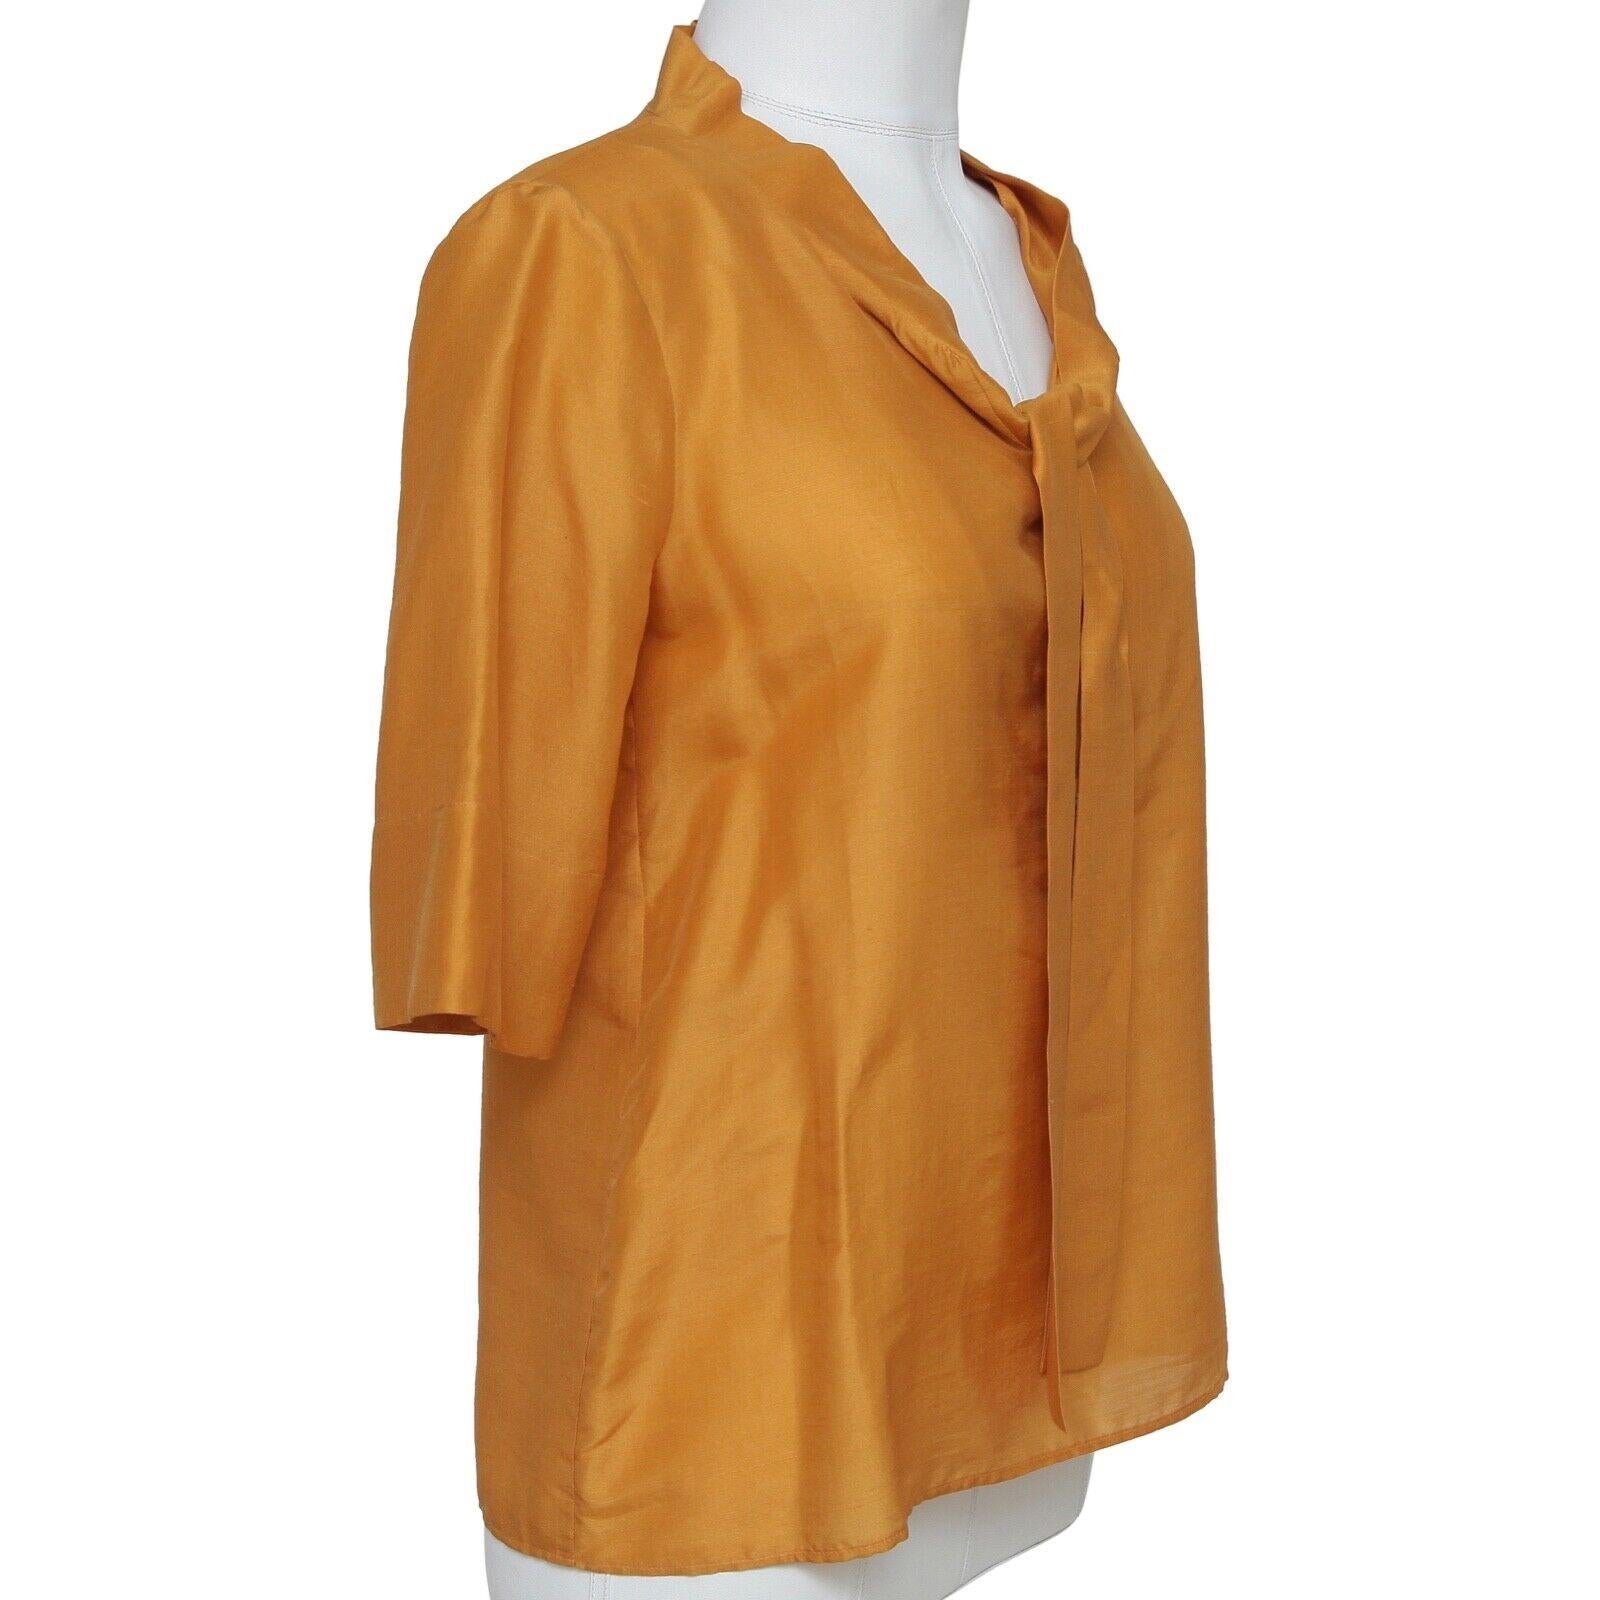 GUARANTEED AUTHENTIC CHLOE FALL 2007 MARIGOLD SILK BLEND SHORT SLEEVE BLOUSE

 

Design:
- Short sleeve marigold (yellow-orange) silk blend blouse.
- Scoop neck, with tie accent.
- Buttons down back of blouse.
- Beautiful, lightweight year